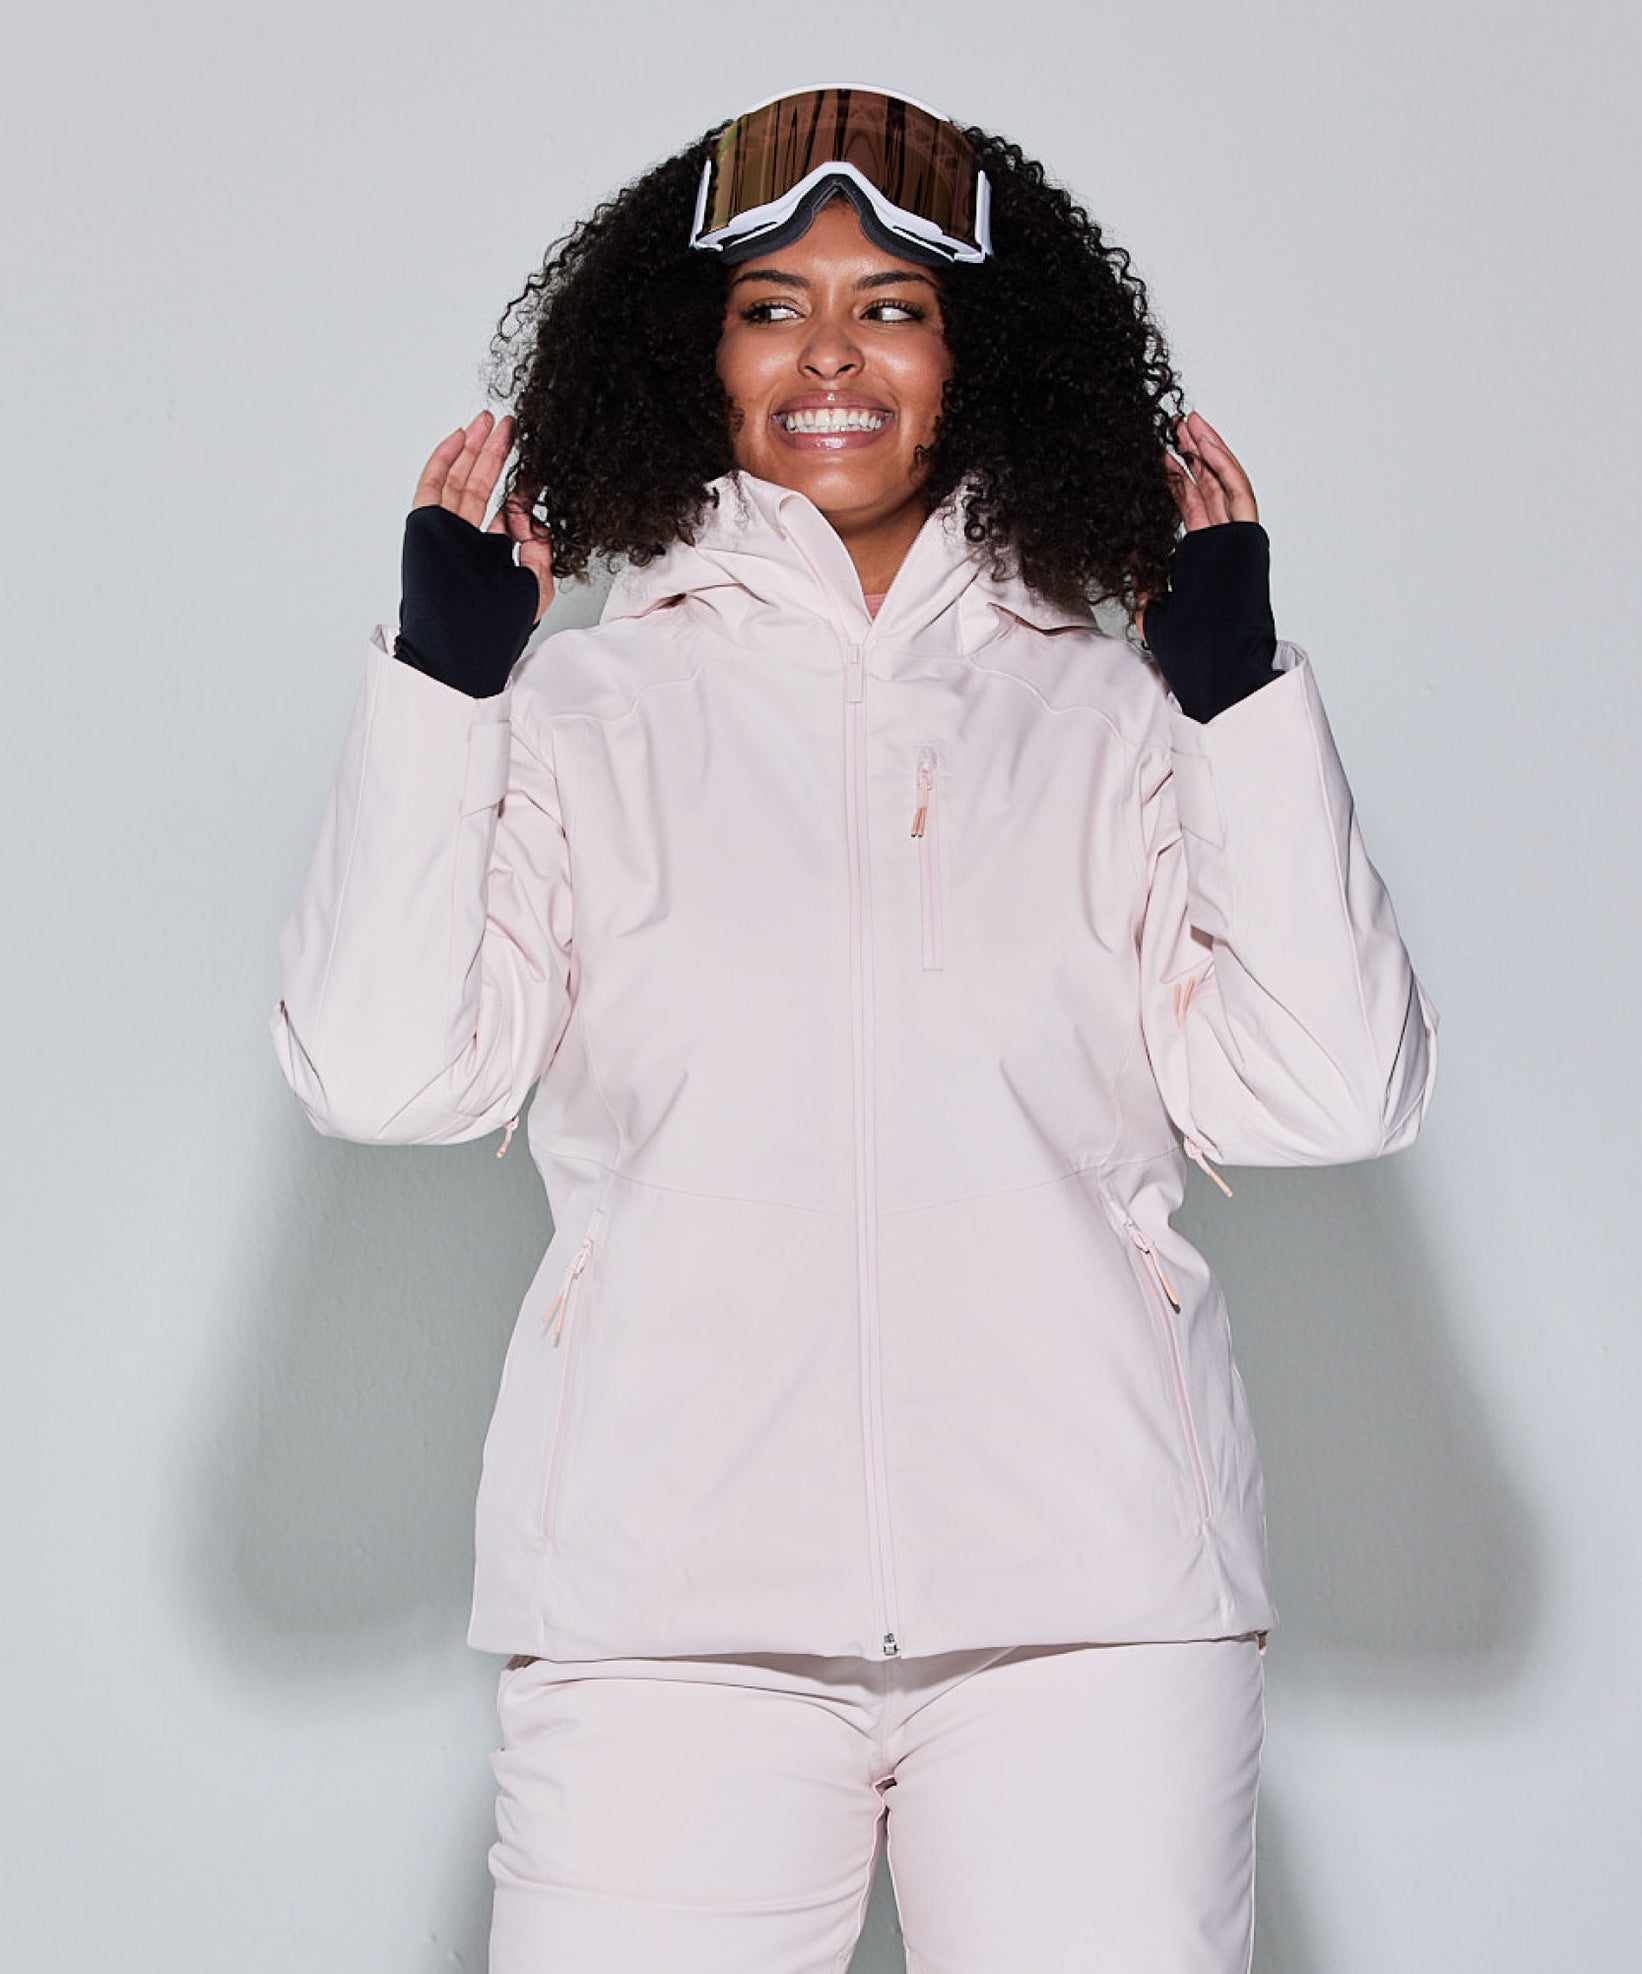 Halfdays Is Out Here Making Skiwear Actually Accessible